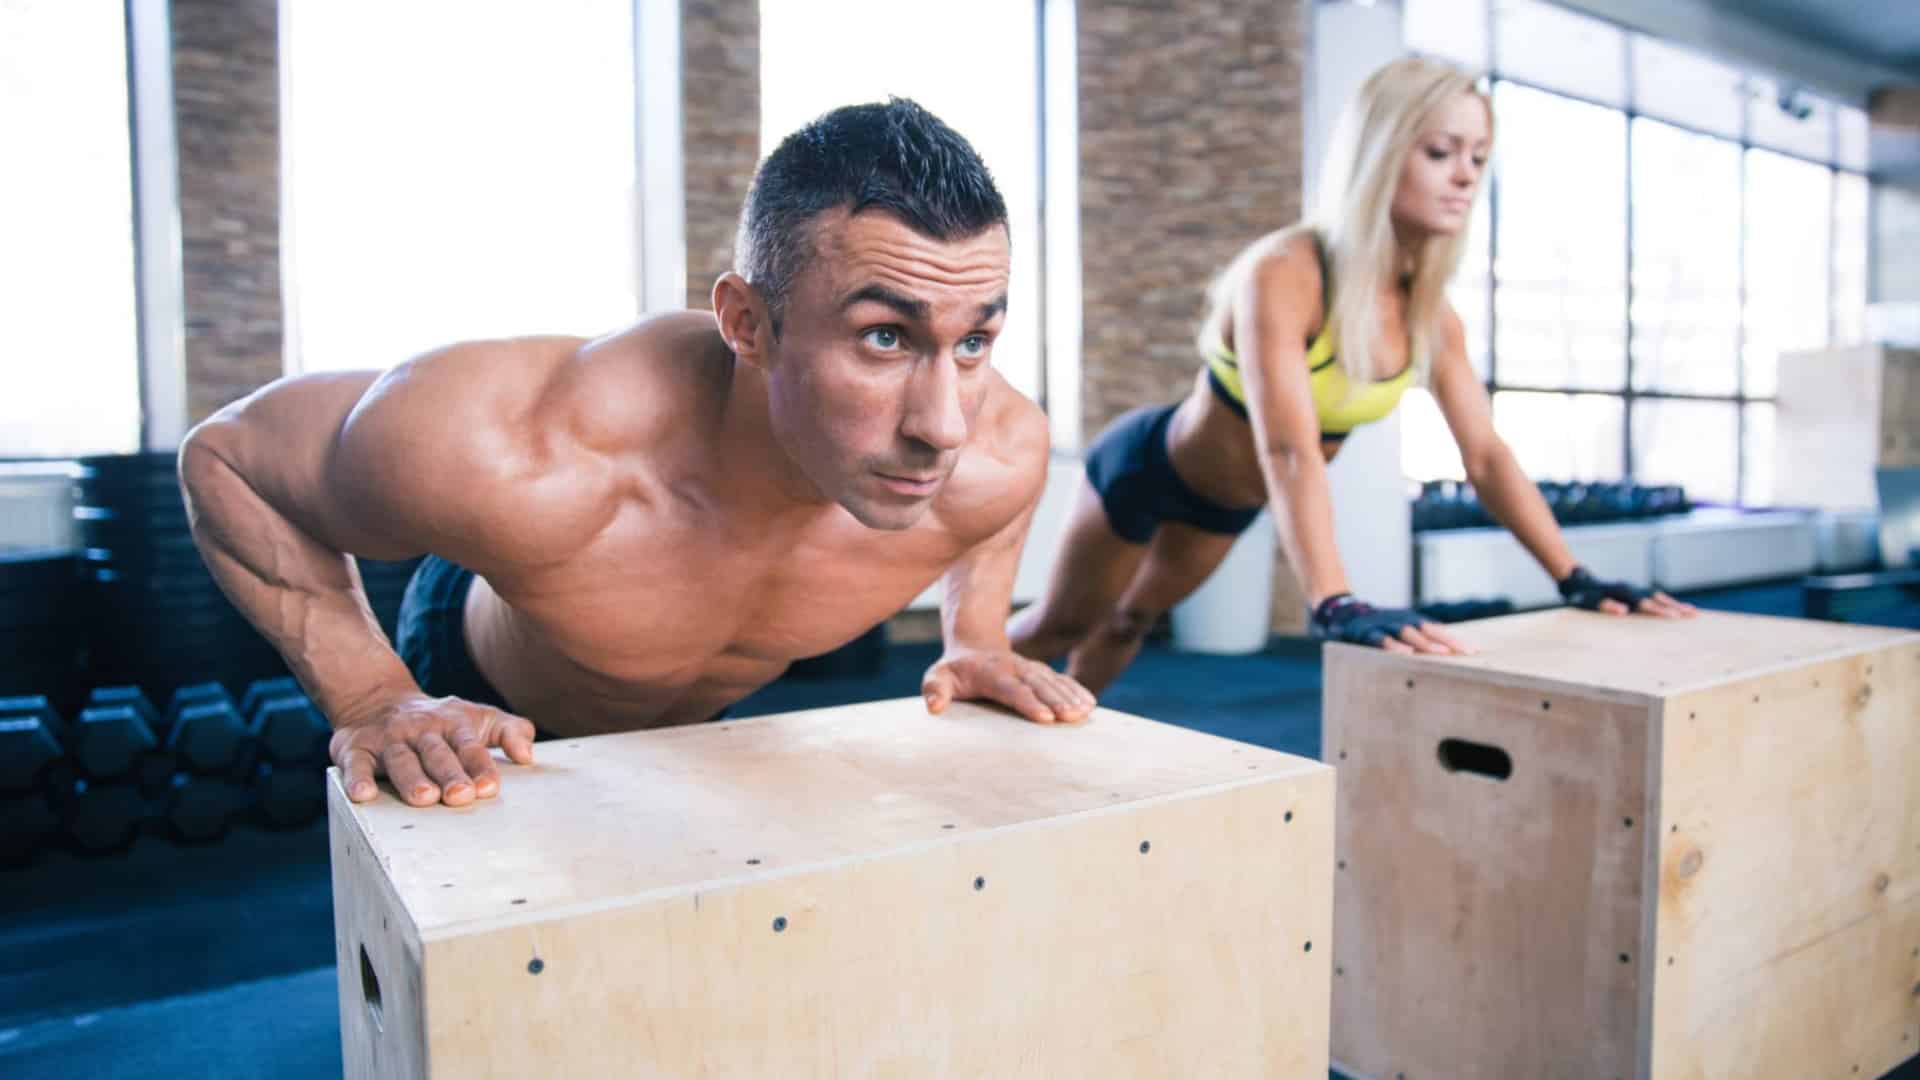 Chest exercises without weight